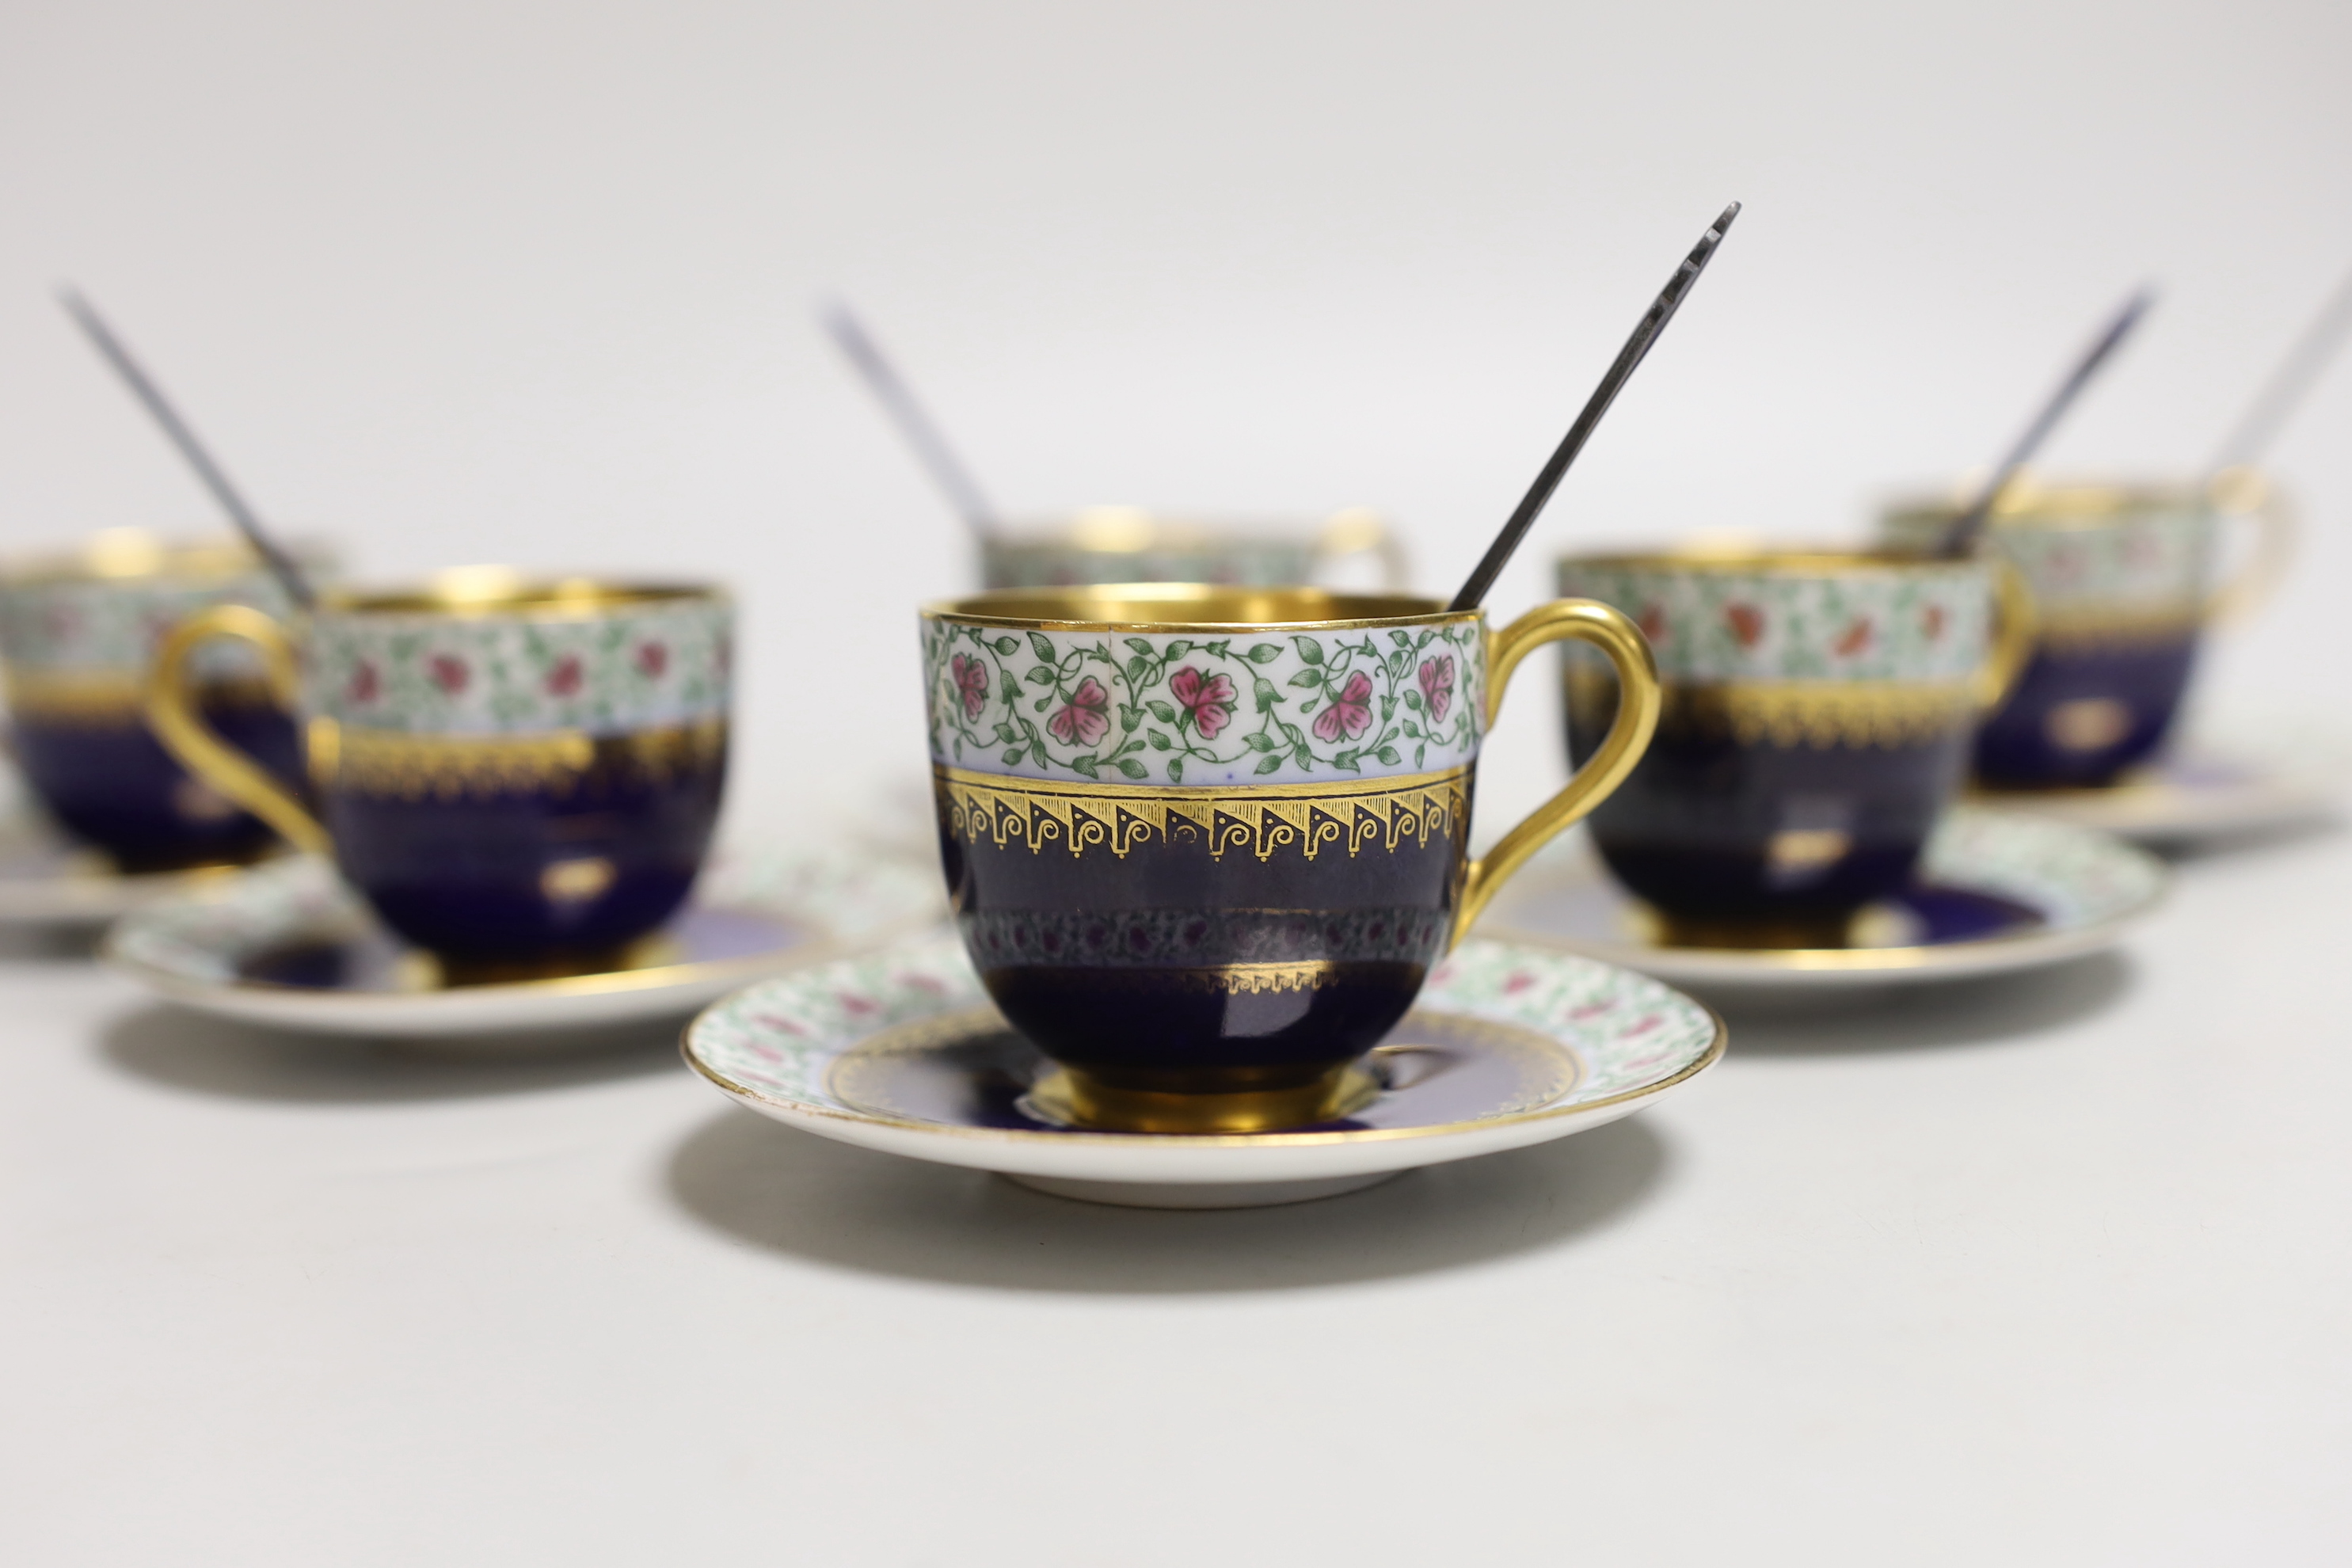 A set of six Royal Worcester porcelain coffee cups and saucers, together with a set of six silver and blue enamelled spoons